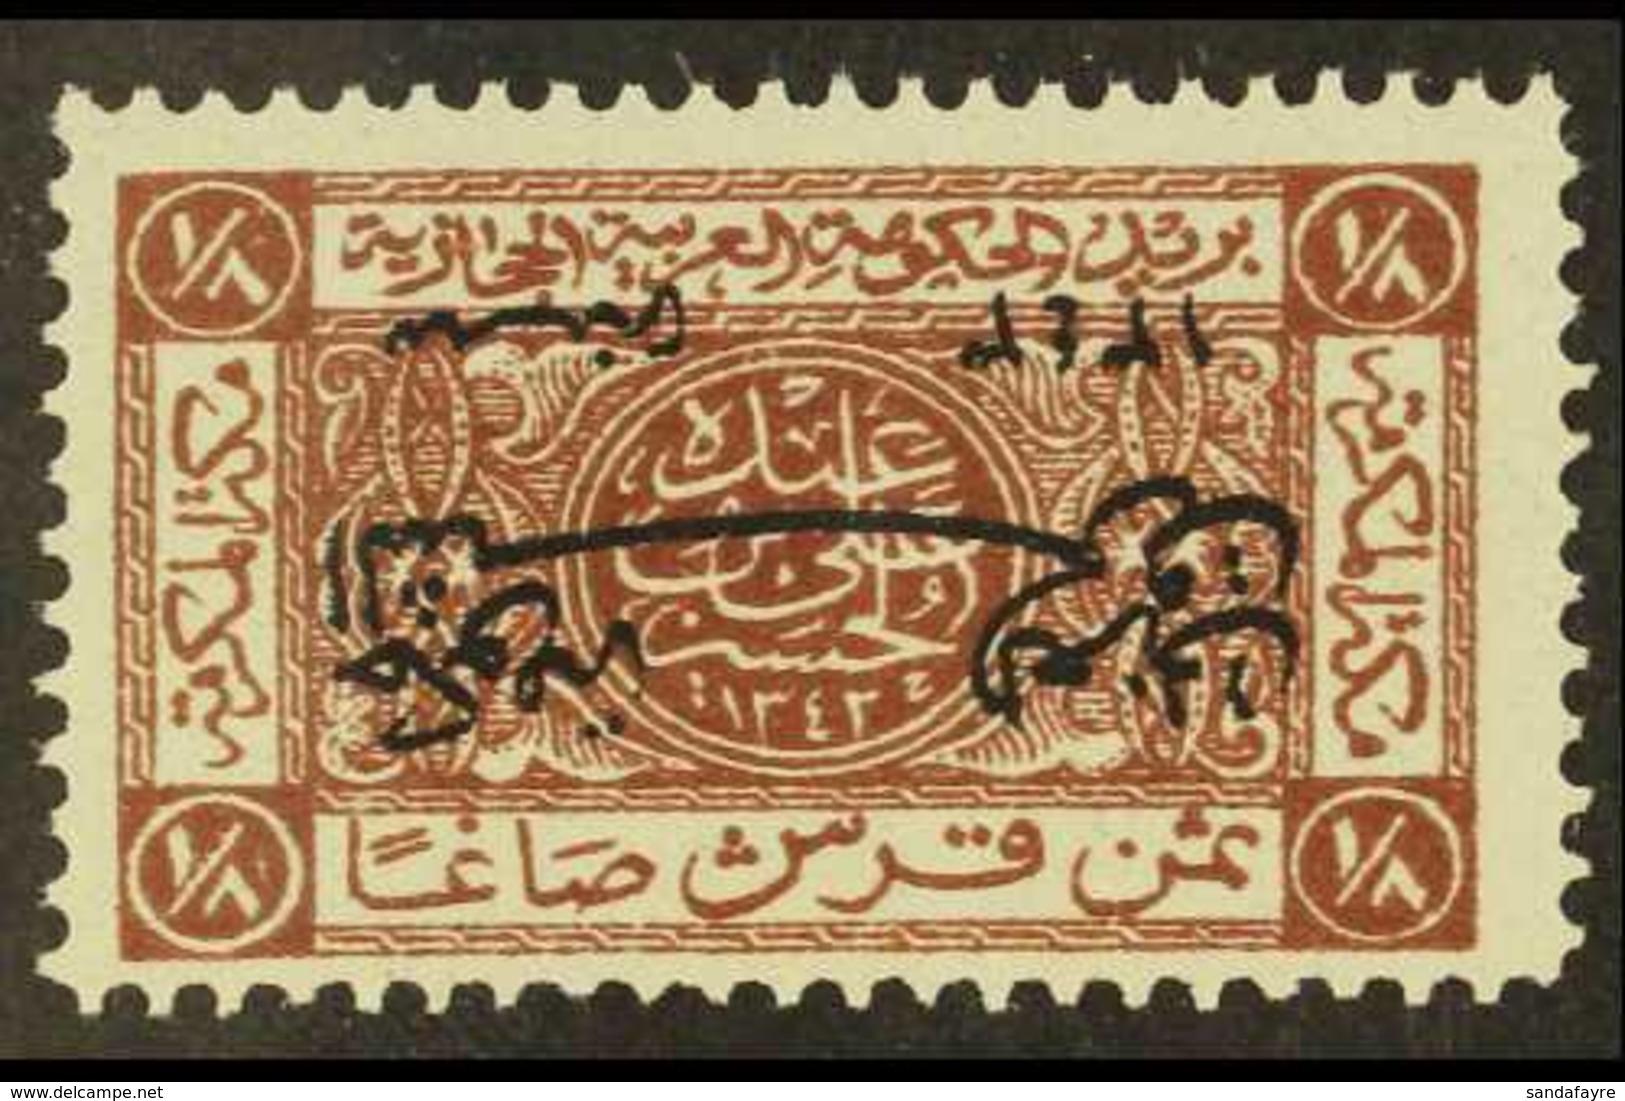 1925 (August) 1/8p Chocolate Of Saudi Arabia With Overprint INVERTED, SG 135b, Very Fine Never Hinged Mint. For More Ima - Jordan